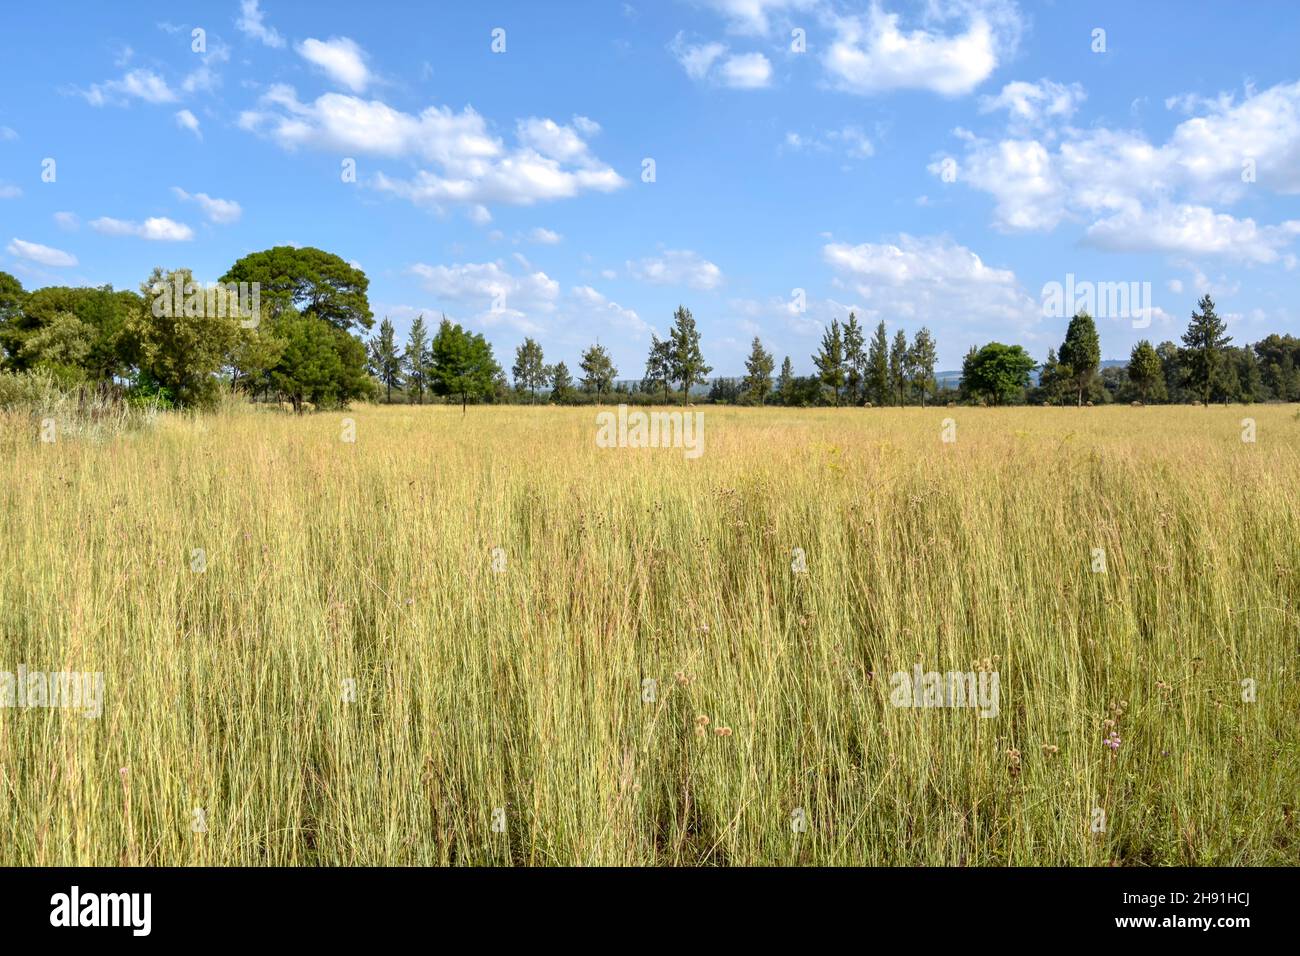 A landscape view in eastern Pretoria south africa with trees at the horizon meadows and a blue sky with clouds in the background on a bright sunny day Stock Photo